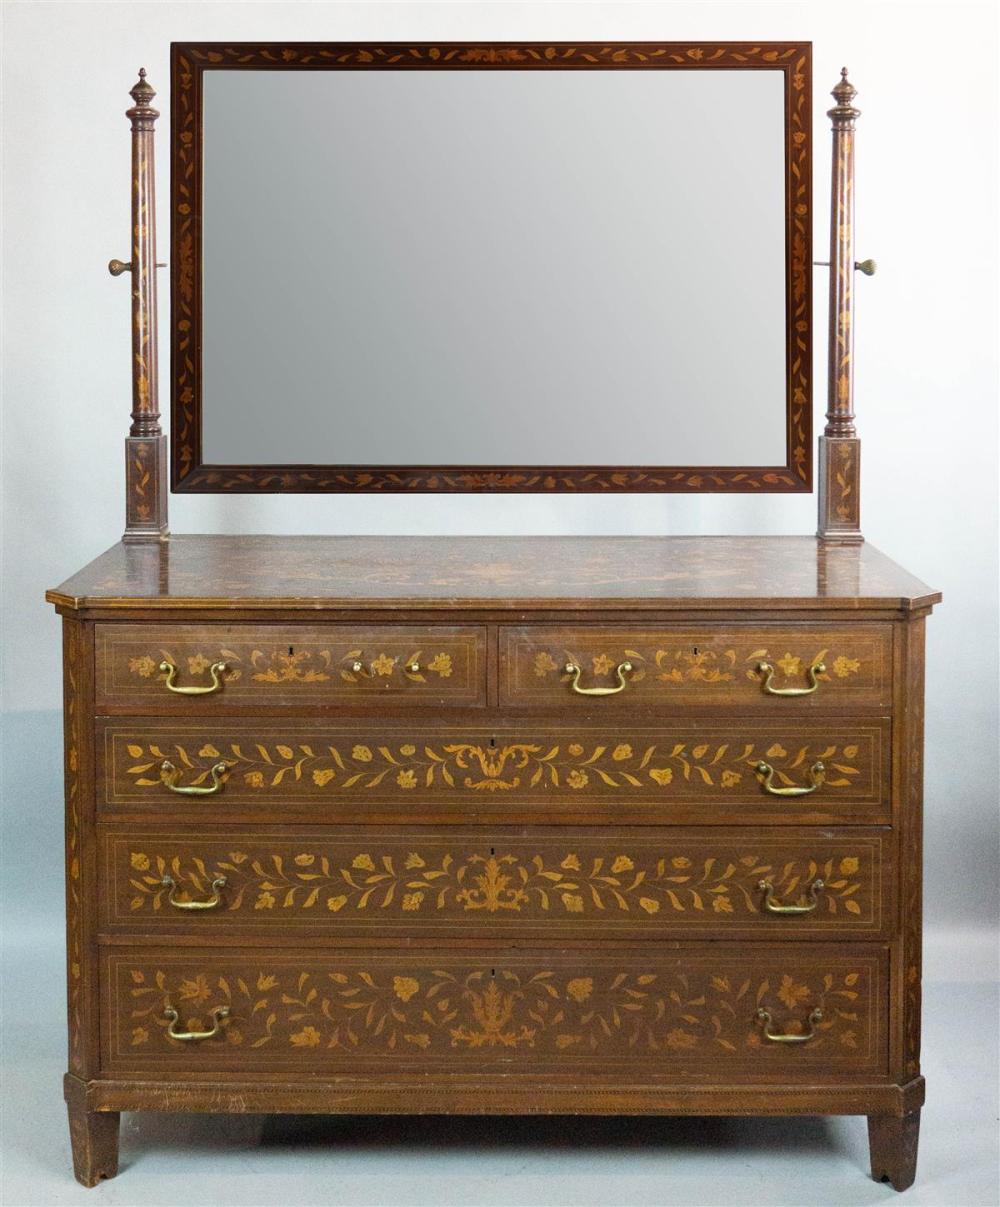 CONTINENTAL STYLE MARQUETRY DRESSER